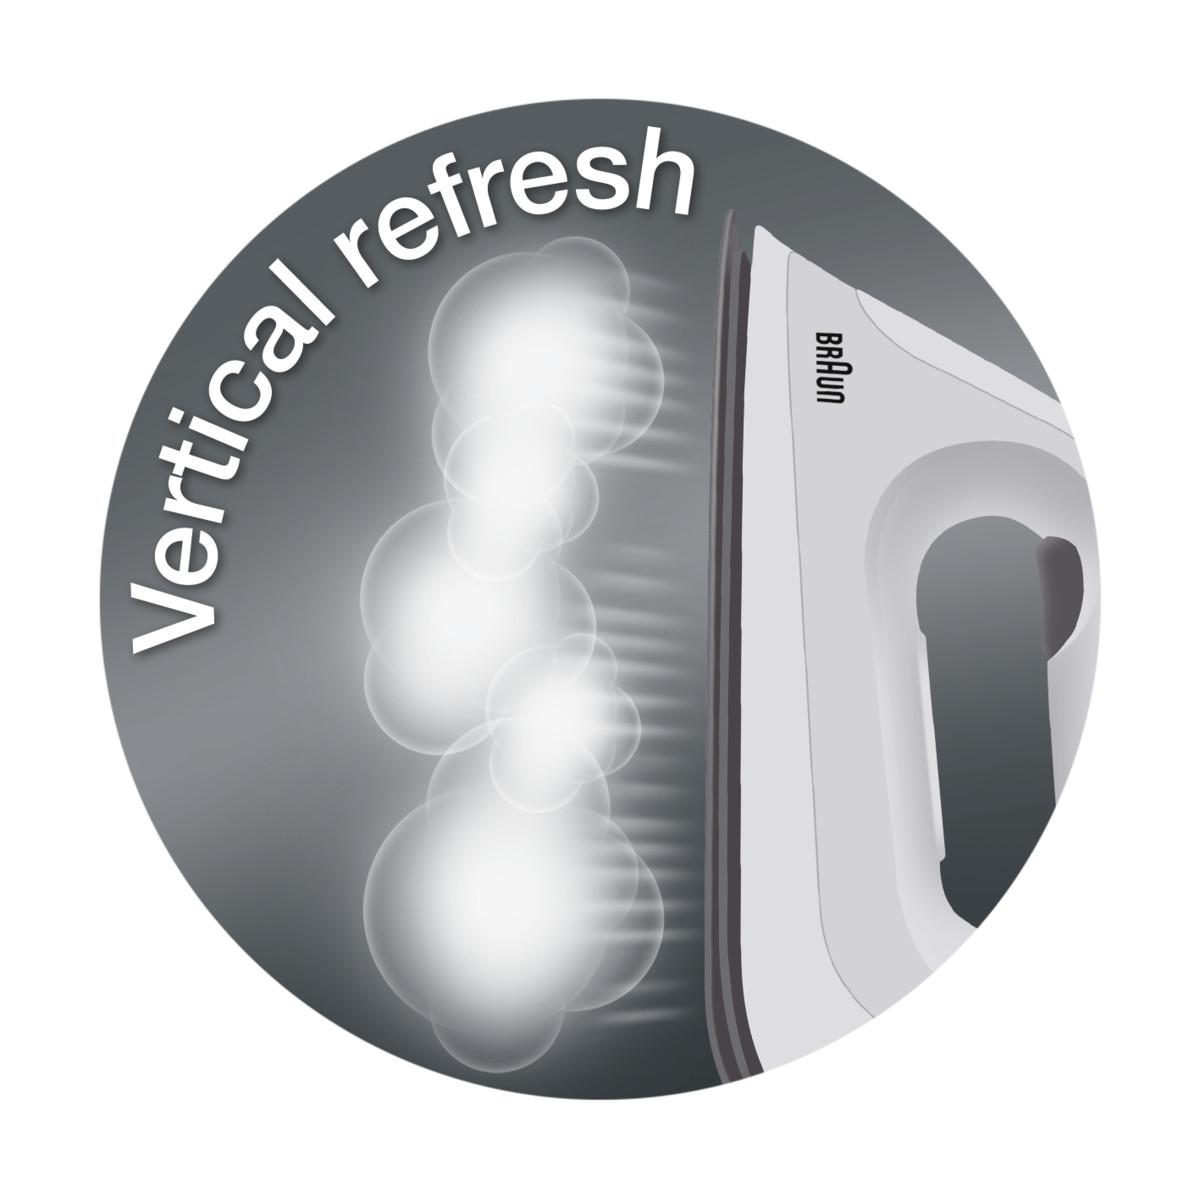 ../../../../../Downloads/ICON_CareStyle_Compact_vertical_refresh-2.jpg